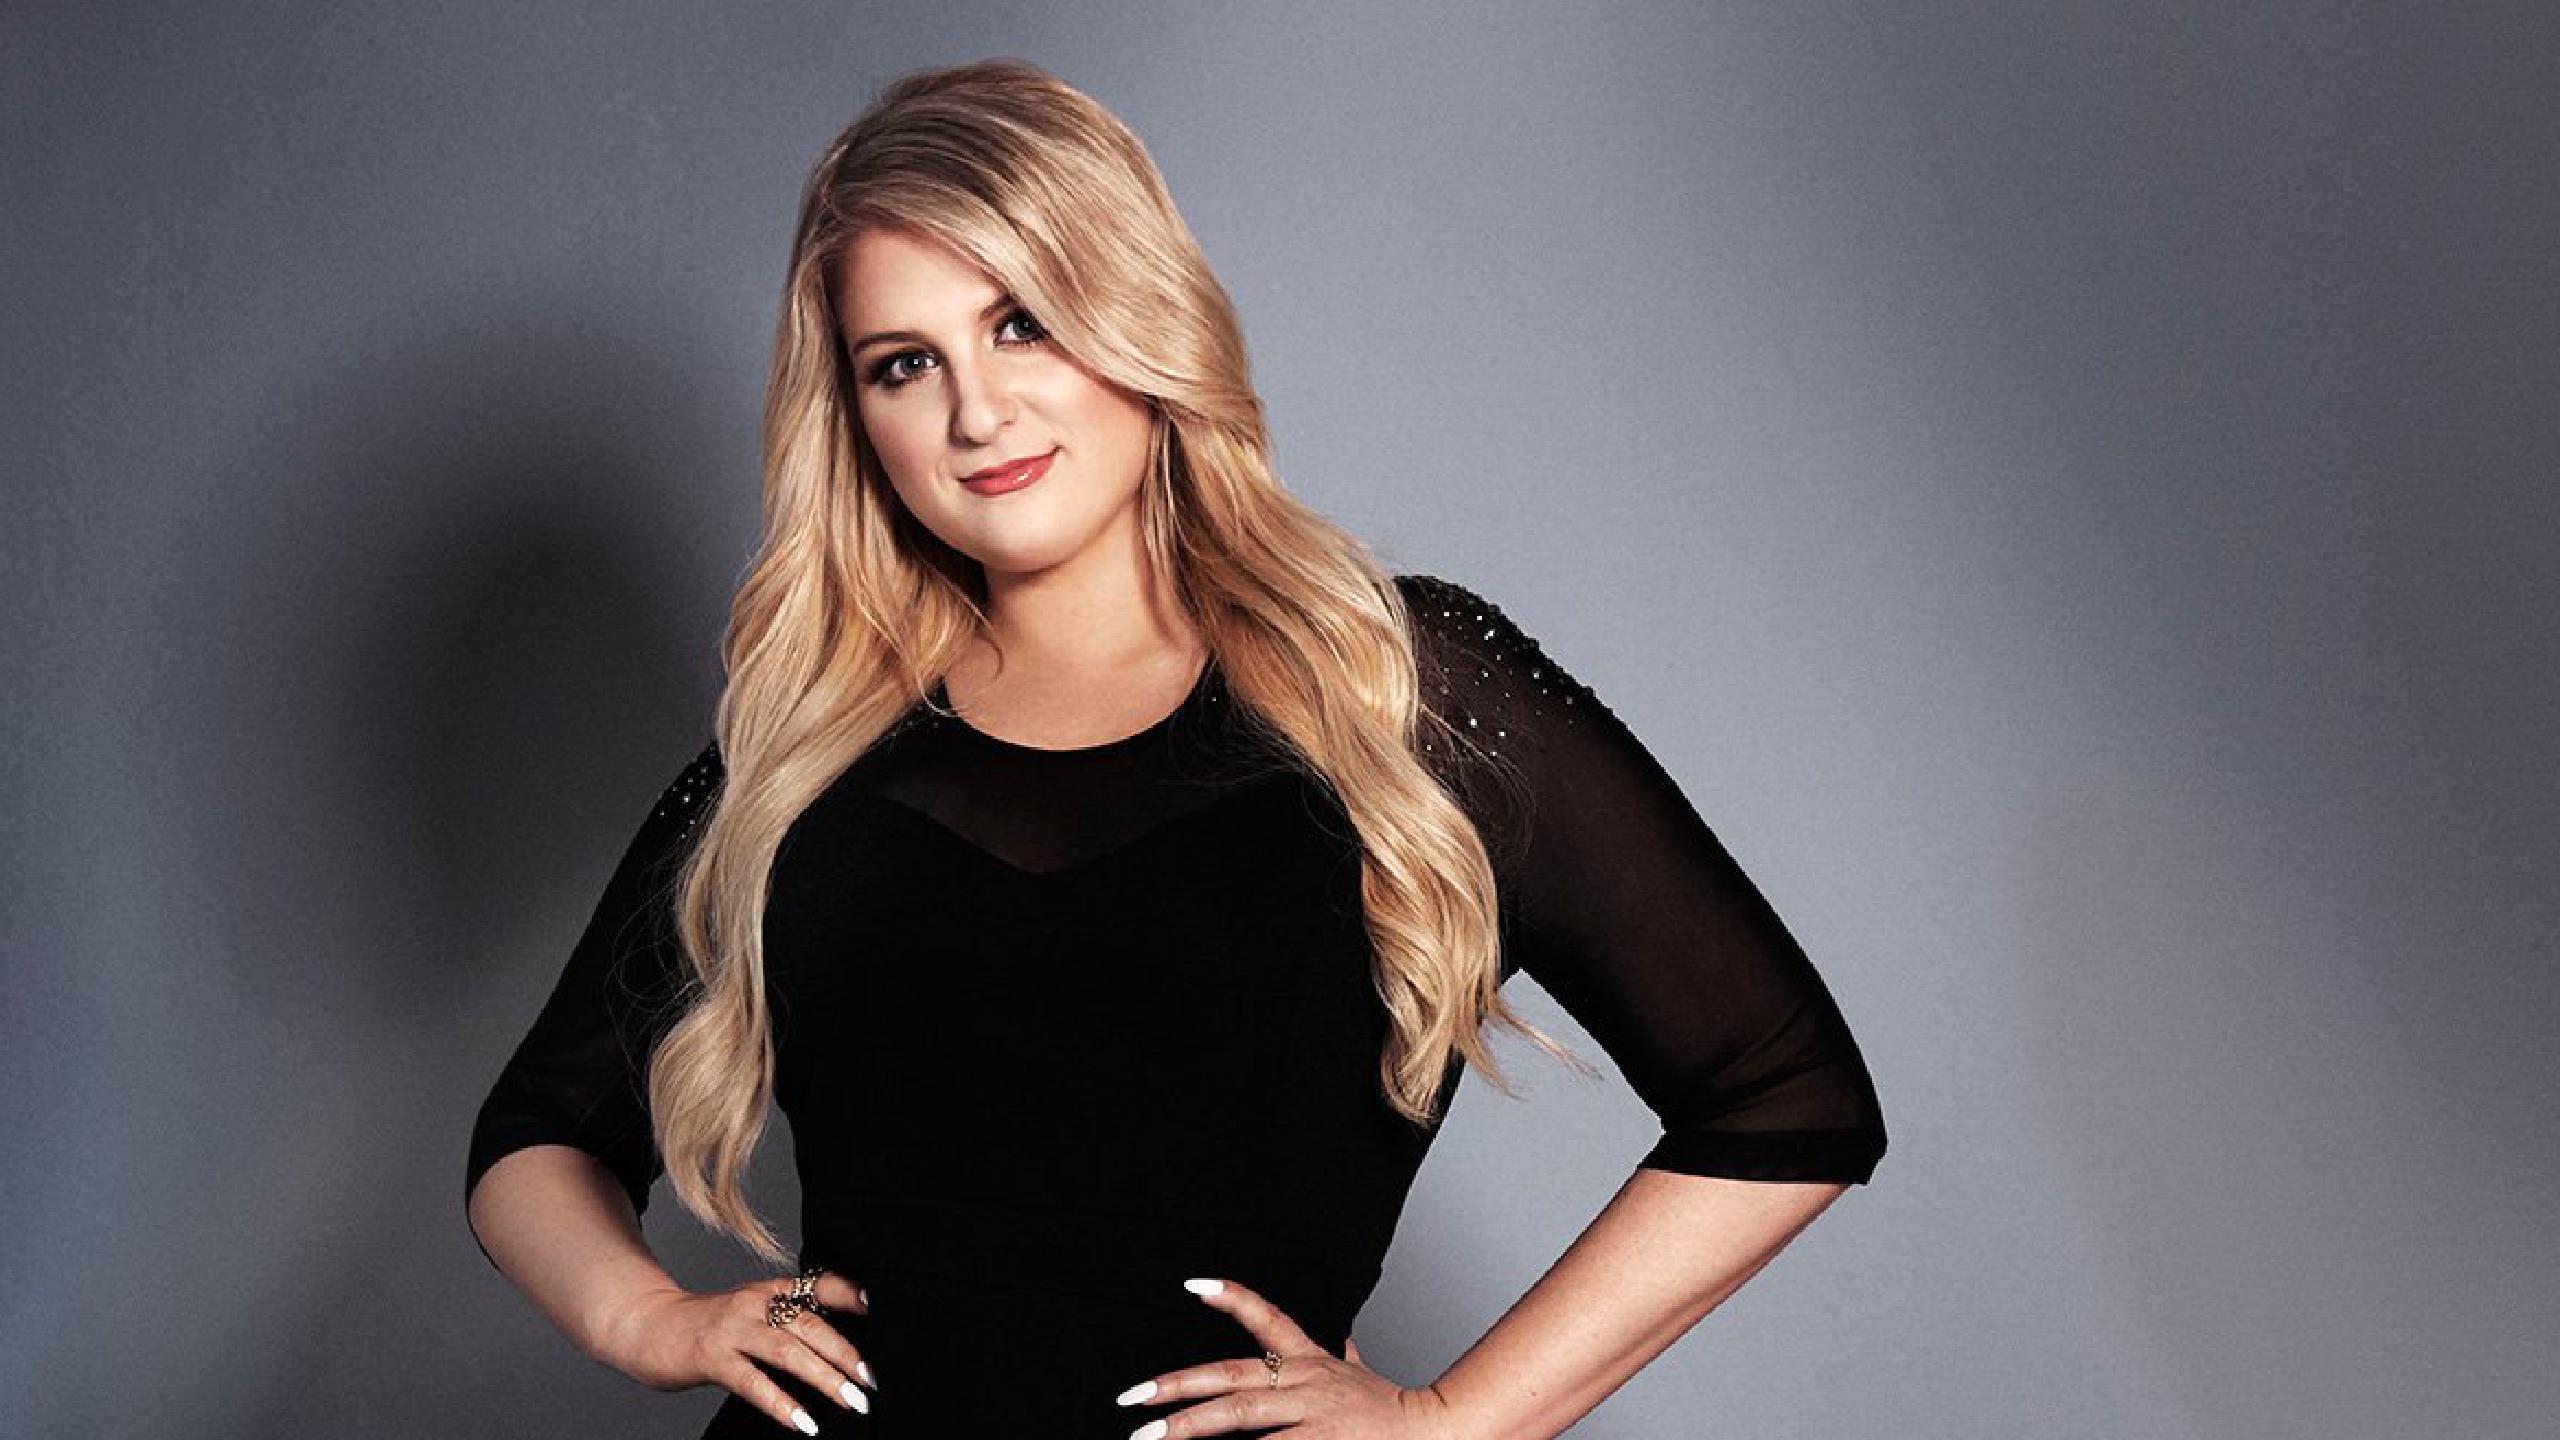 Meghan Trainor tour dates 2019 2020. Meghan Trainor tickets and concerts | Wegow